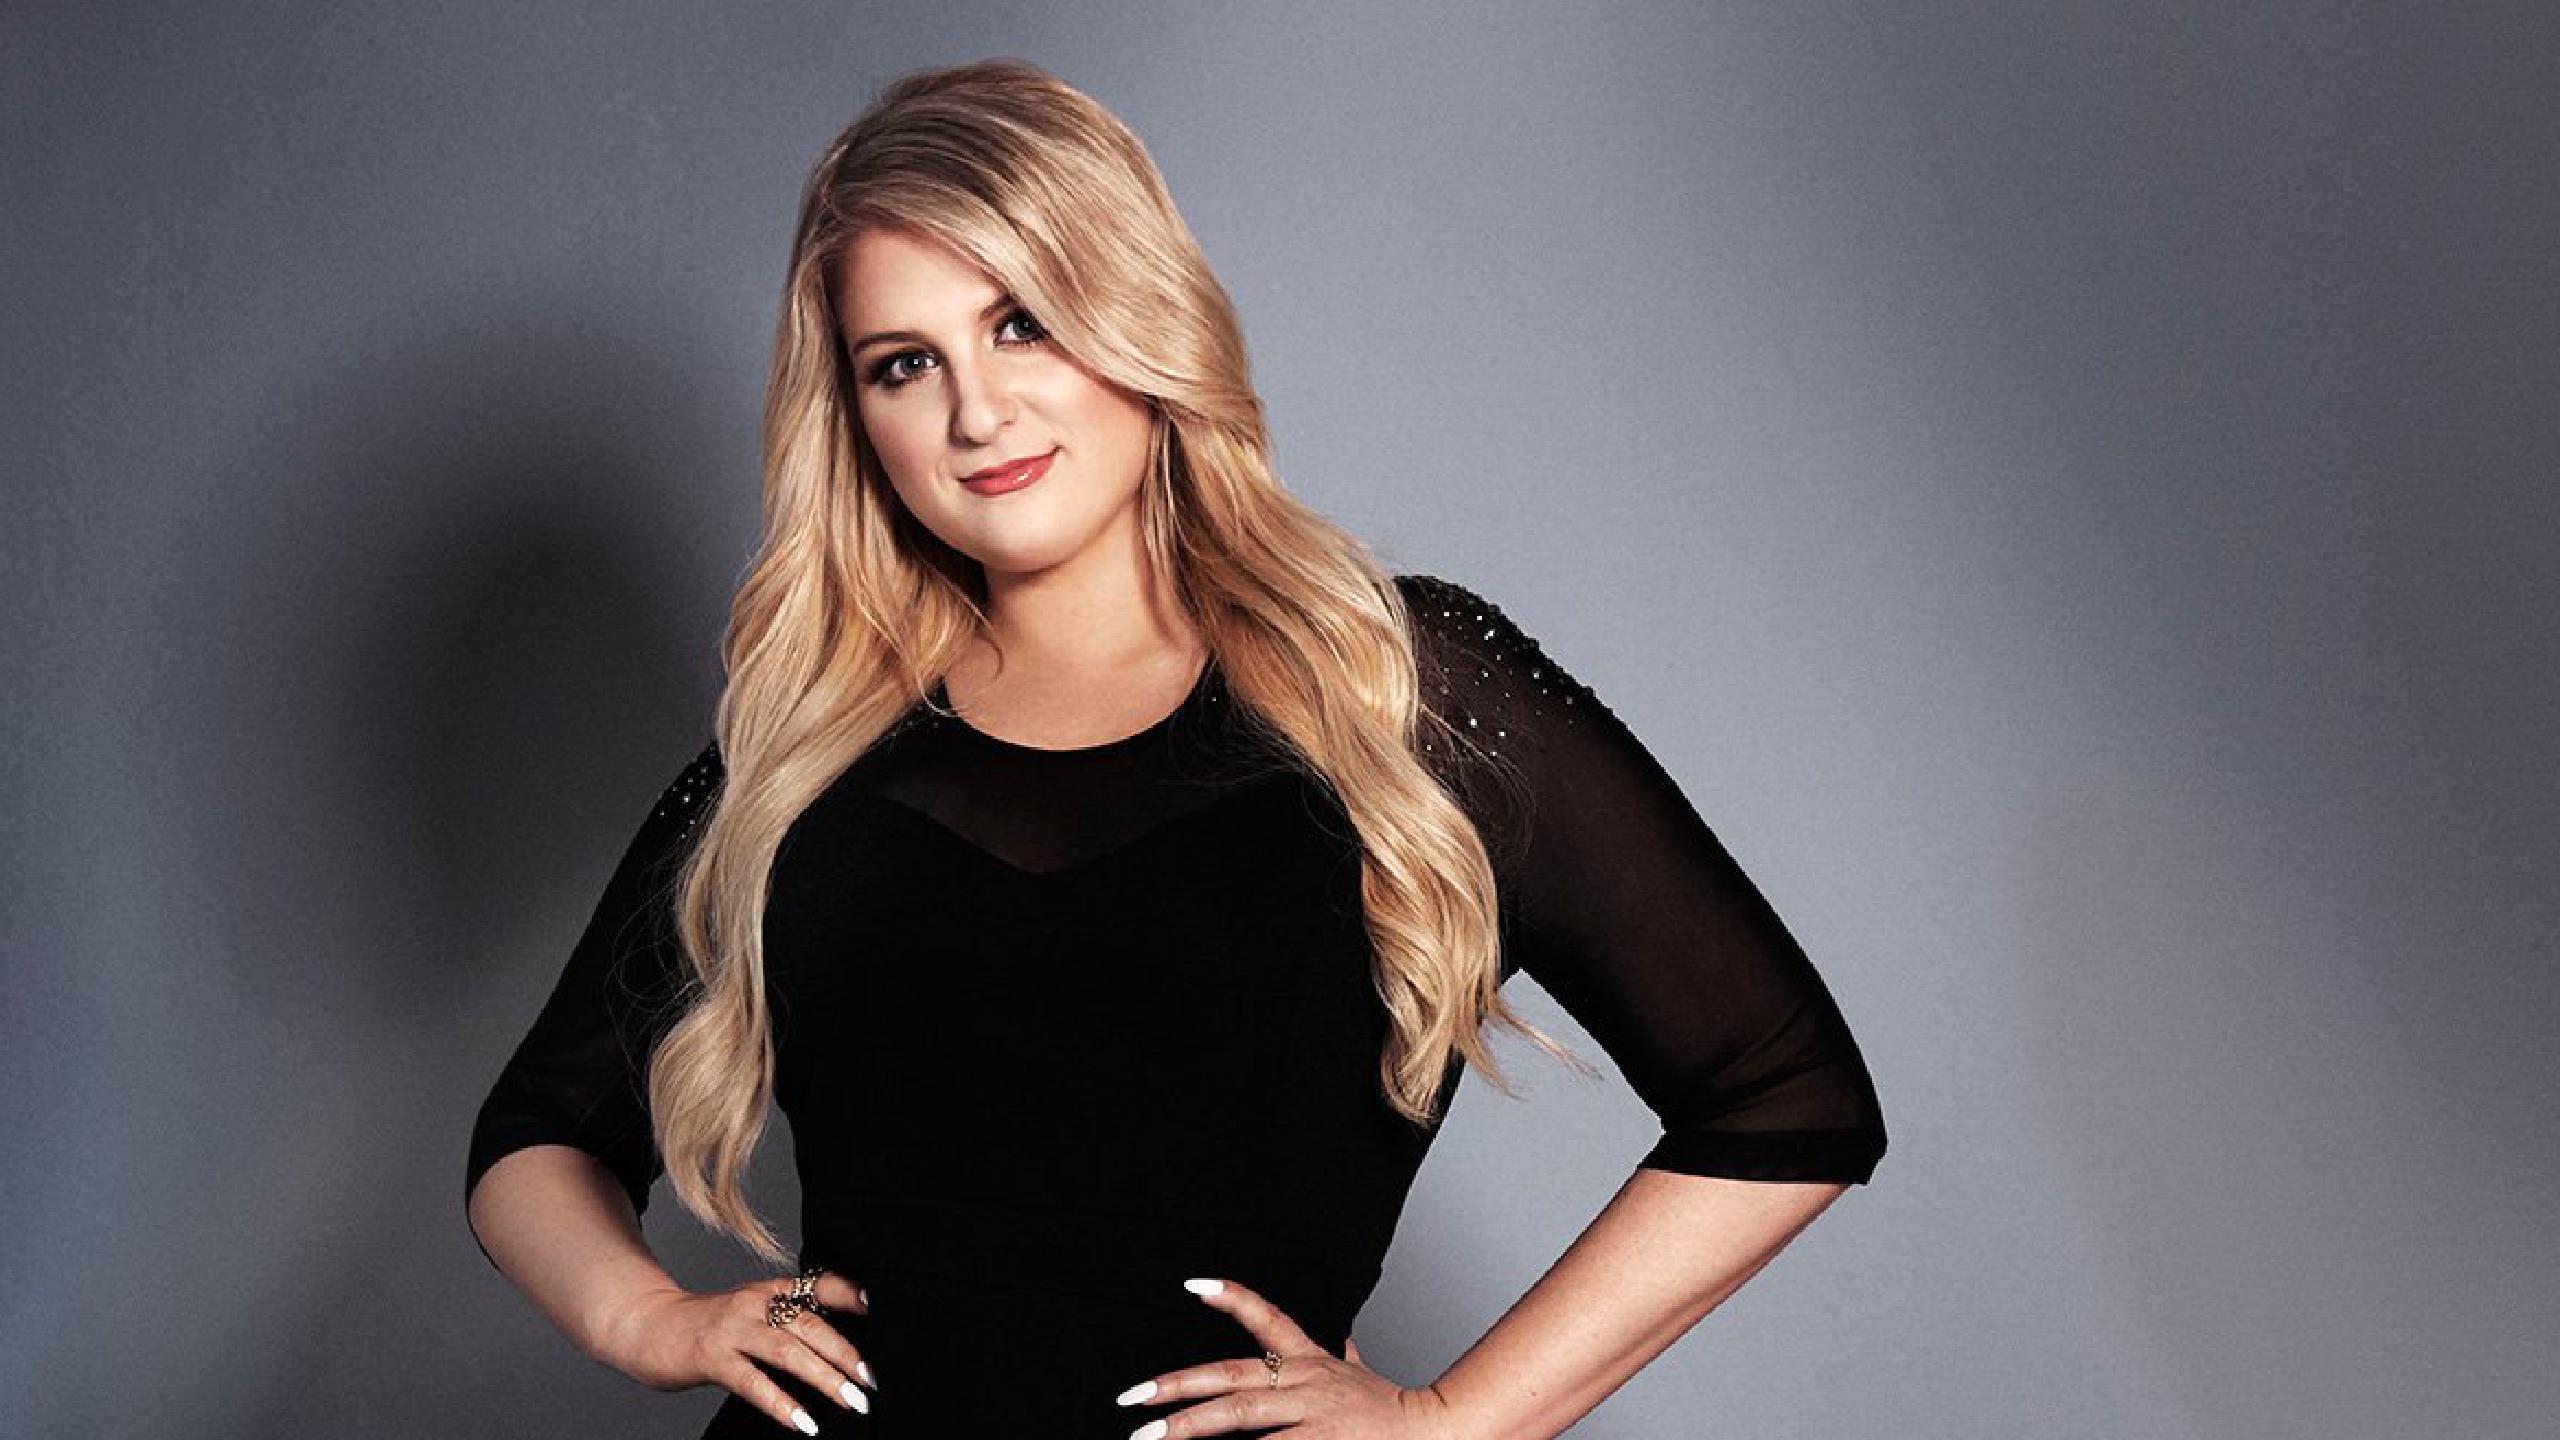 Meghan Trainor tour dates 2019 2020. Meghan Trainor tickets and concerts | Wegow